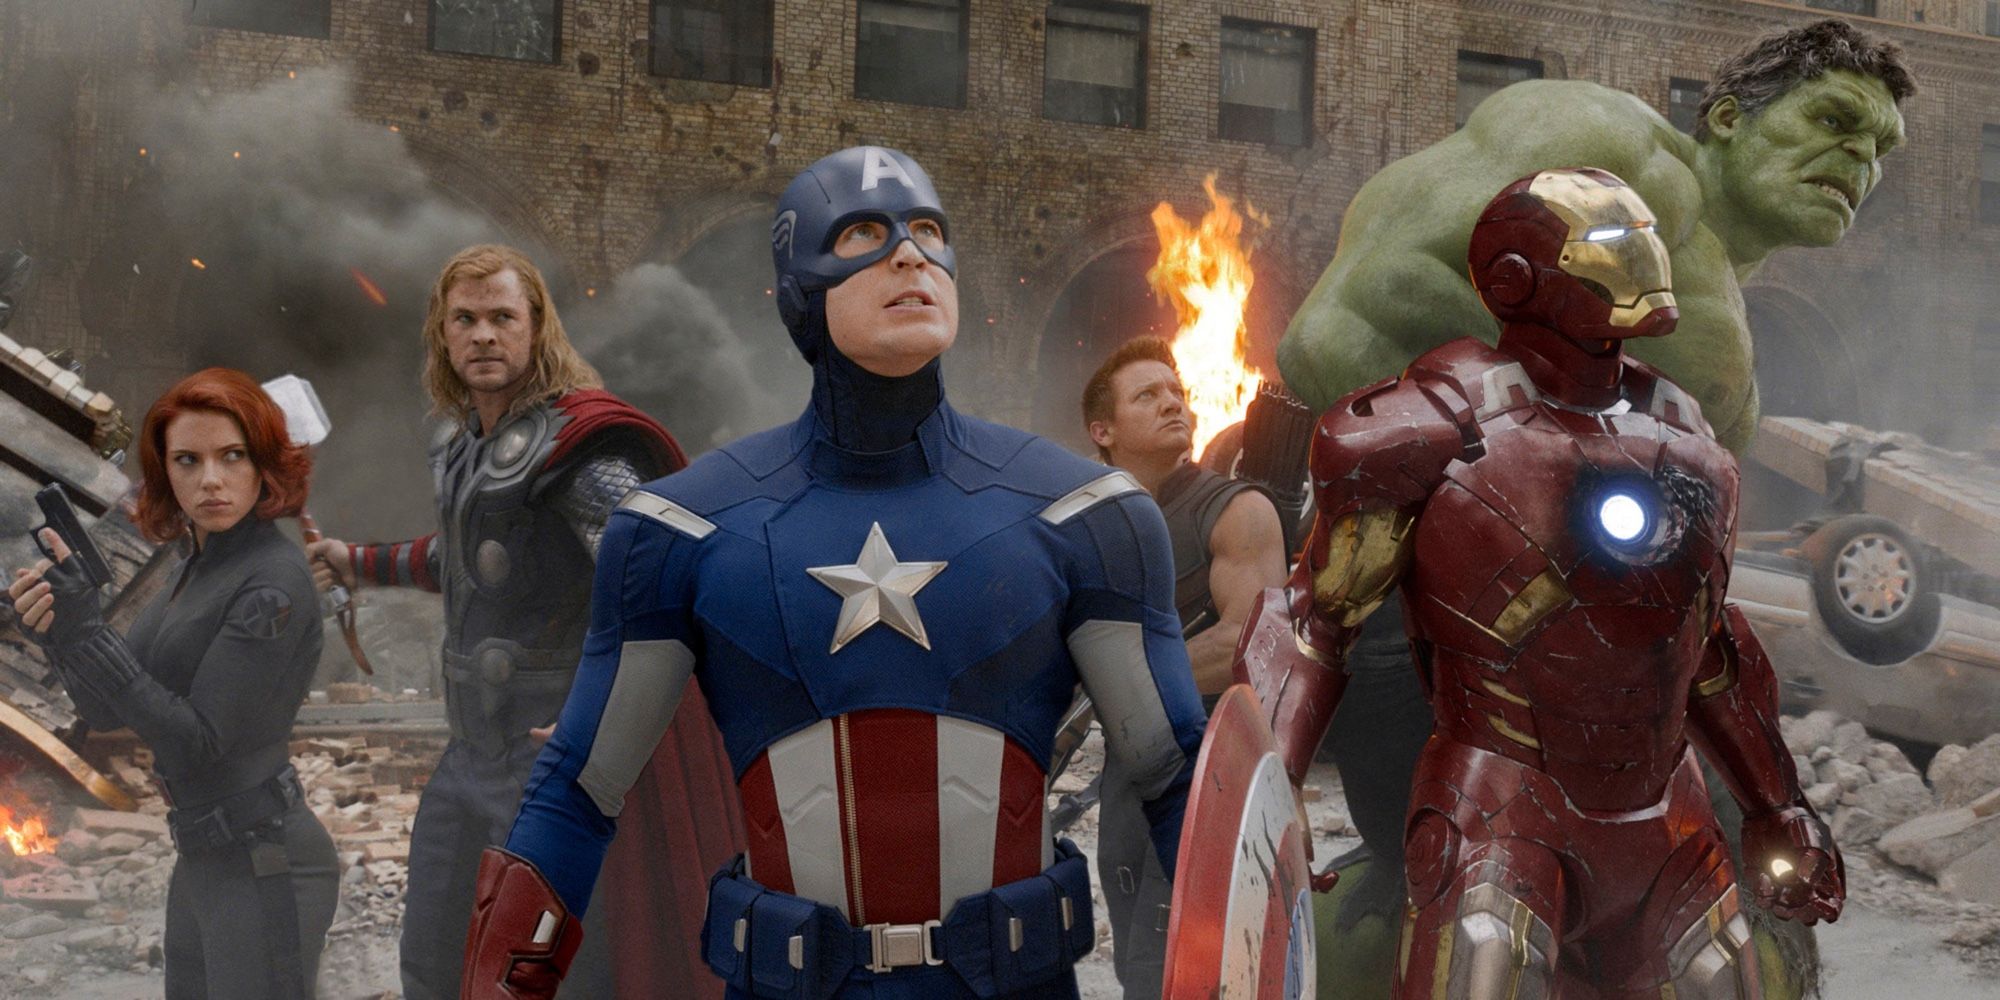 The Avengers standing together in battle